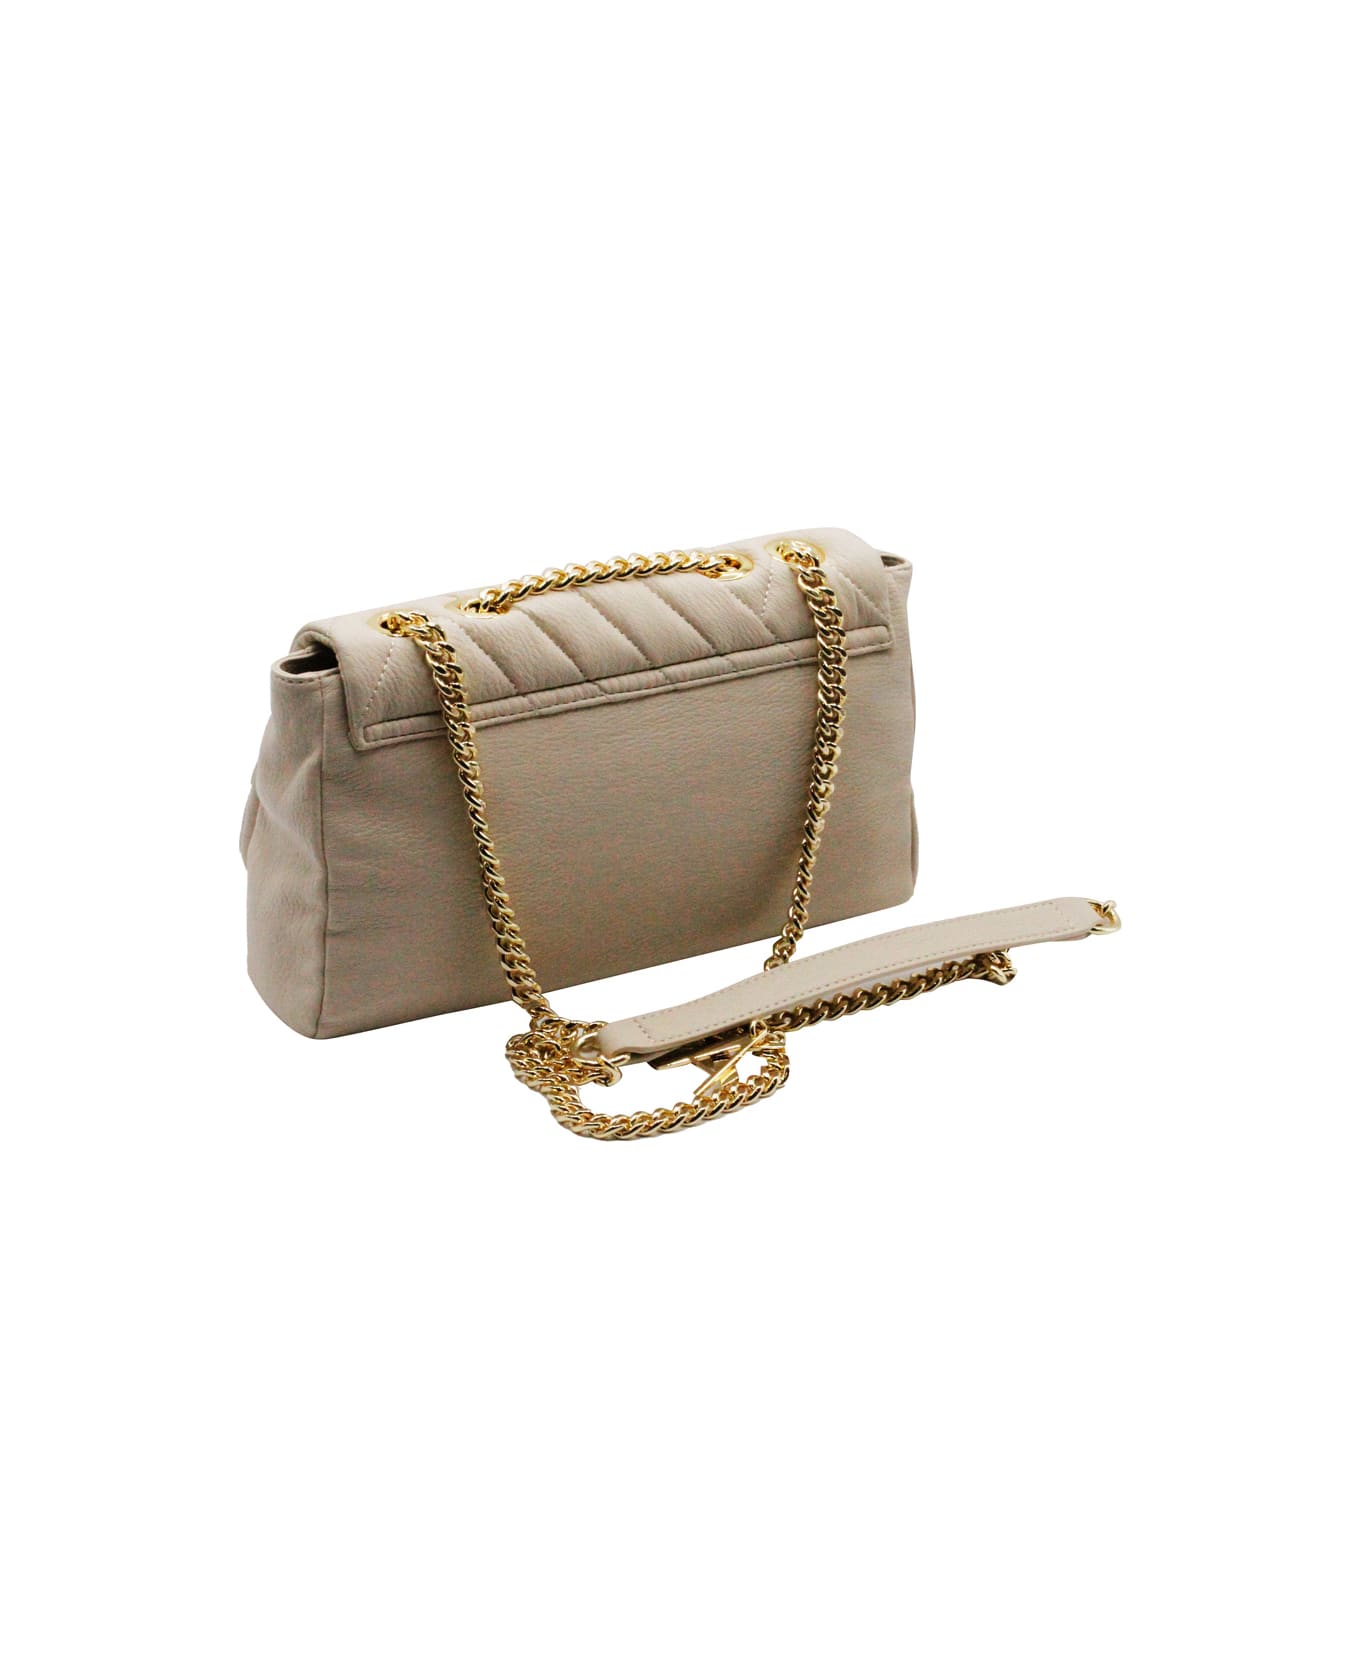 Armani Collezioni Crossbody Bag Made Of Soft Matelassé Faux Leather With Flap And Button Closure And Front Logo. Internal Pockets. - Beige ショルダーバッグ